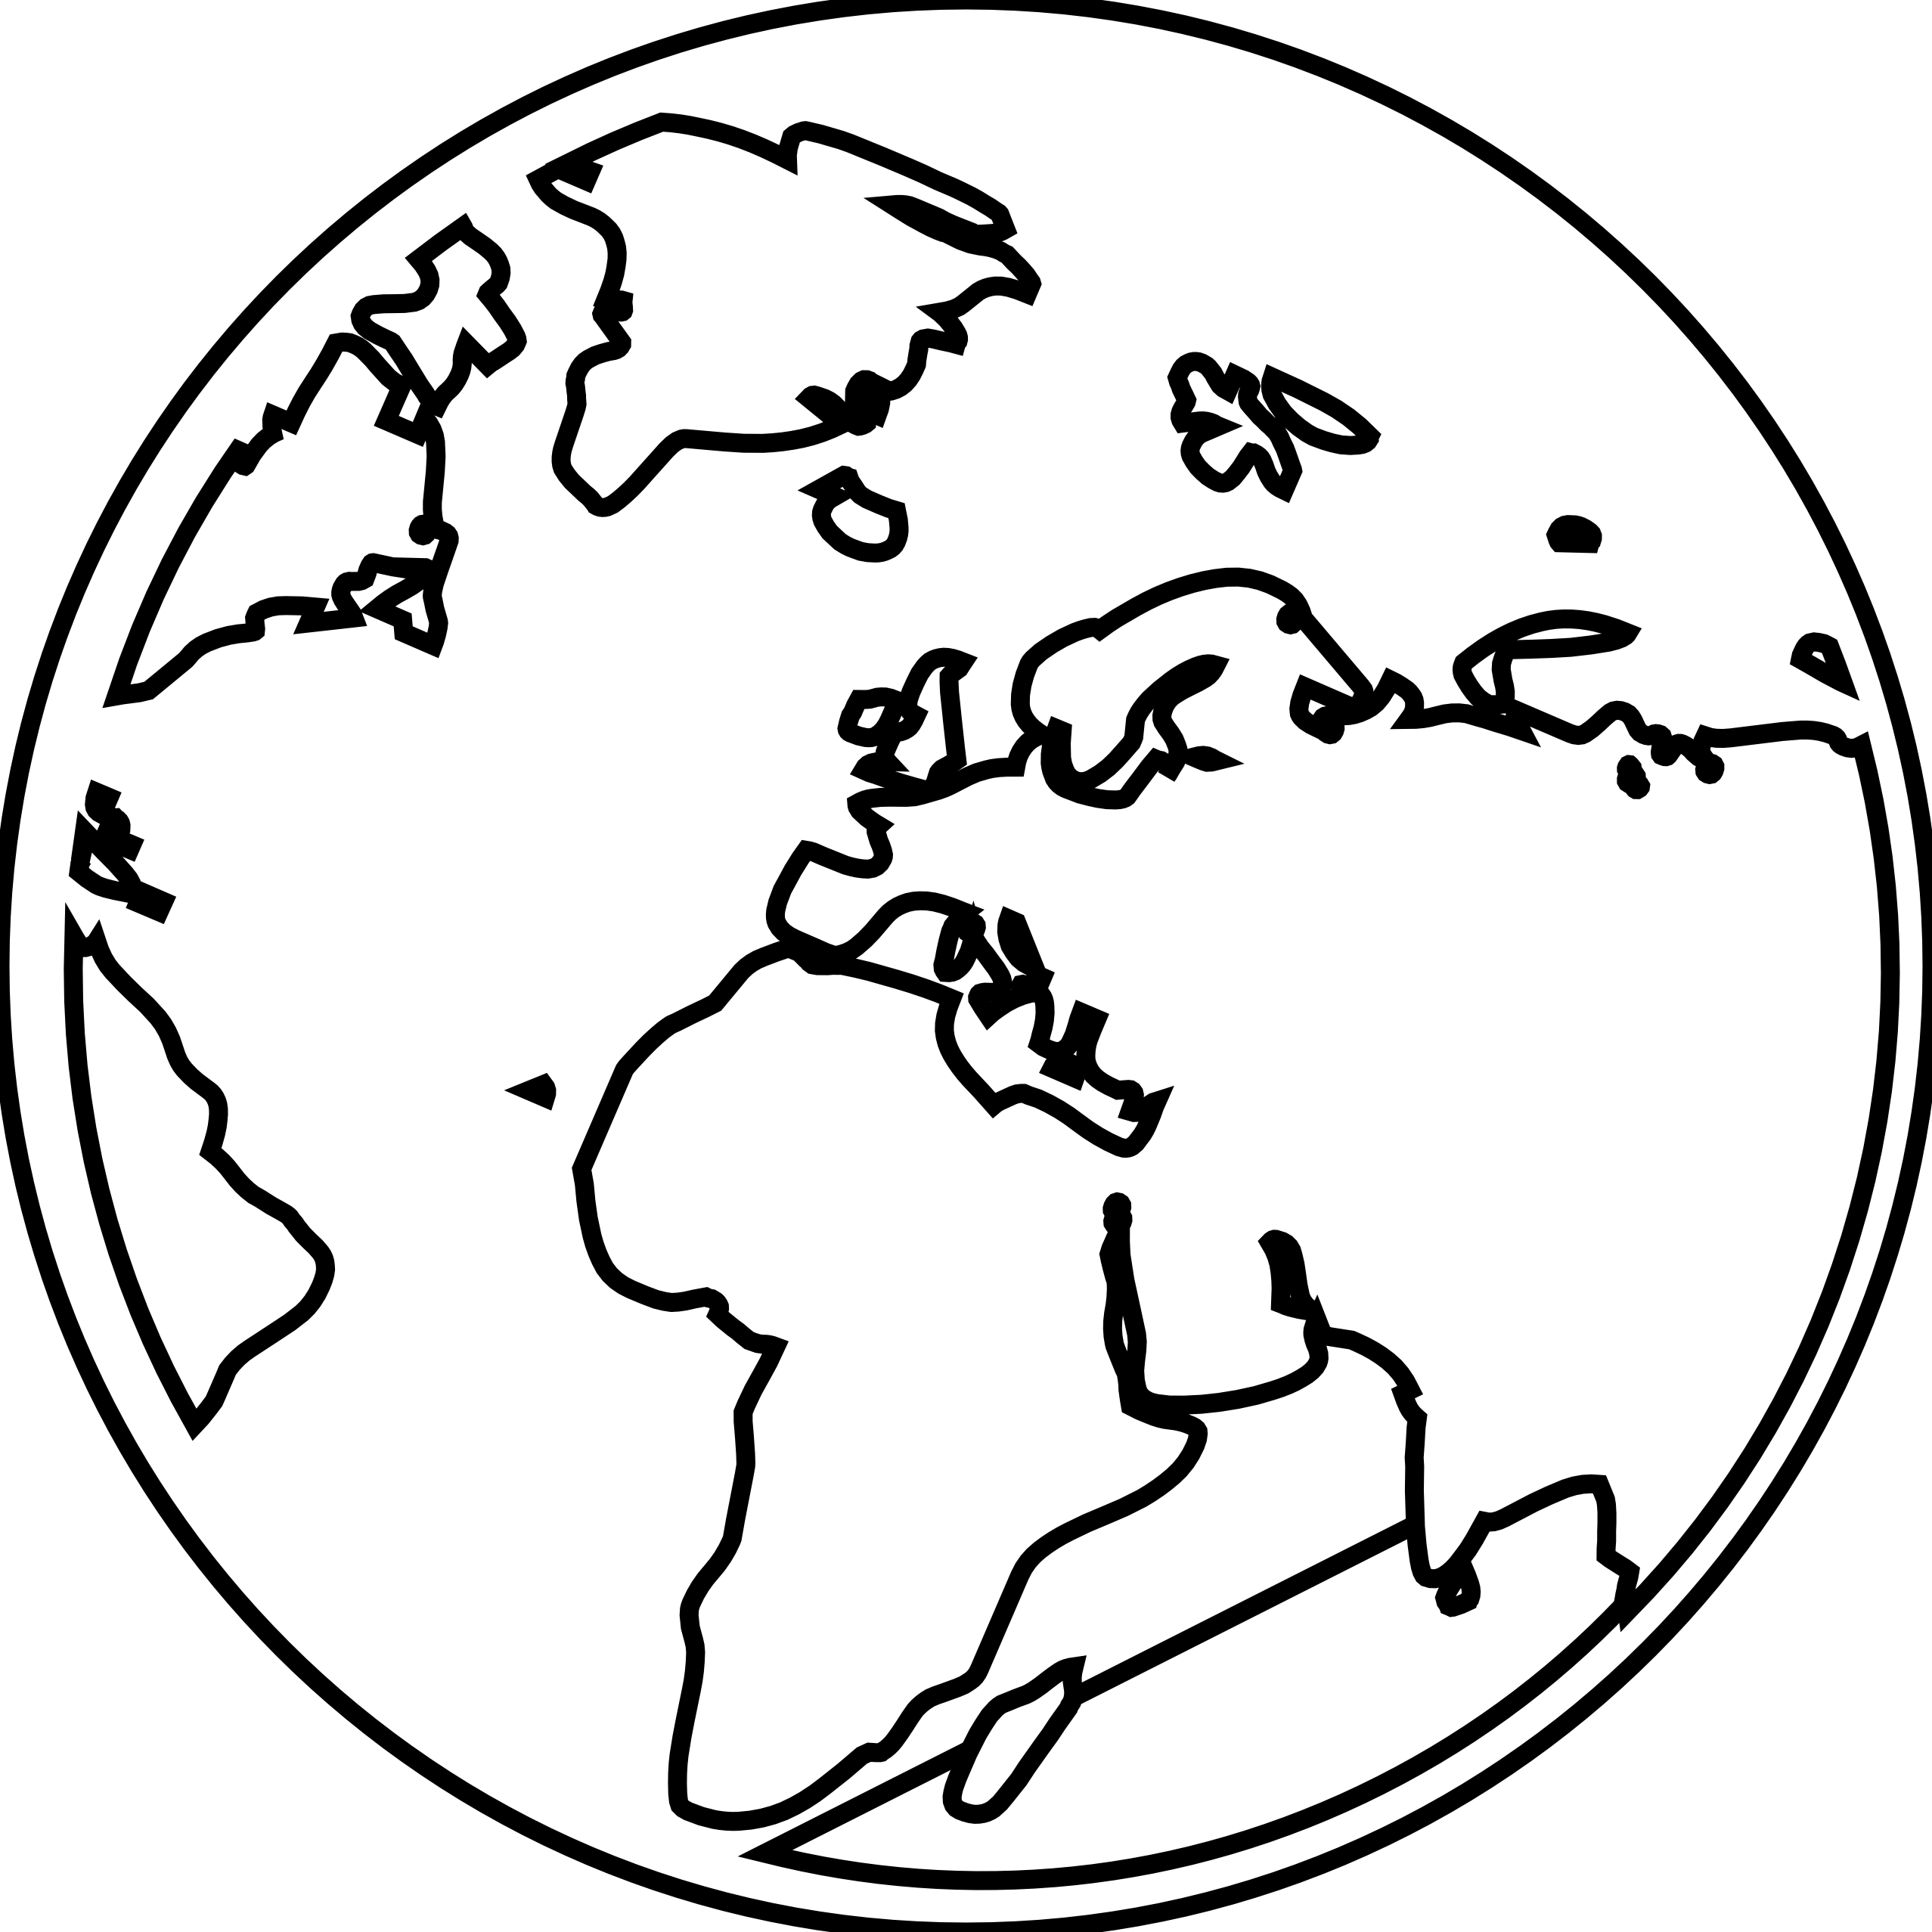 Earth Black And White Outline - Clipart library